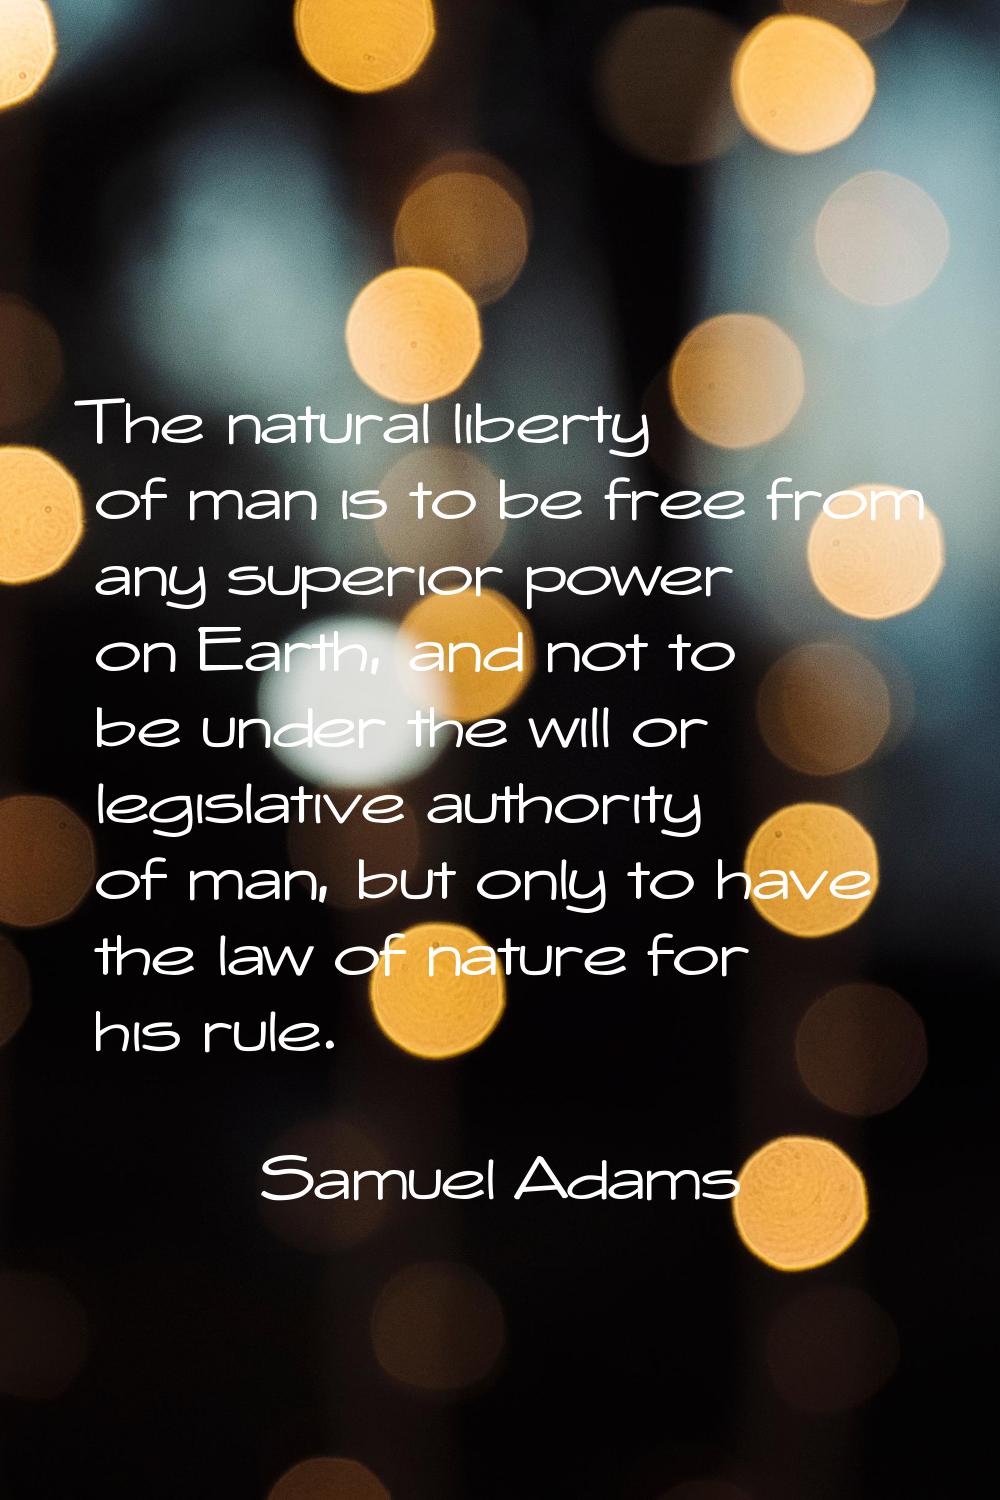 The natural liberty of man is to be free from any superior power on Earth, and not to be under the 